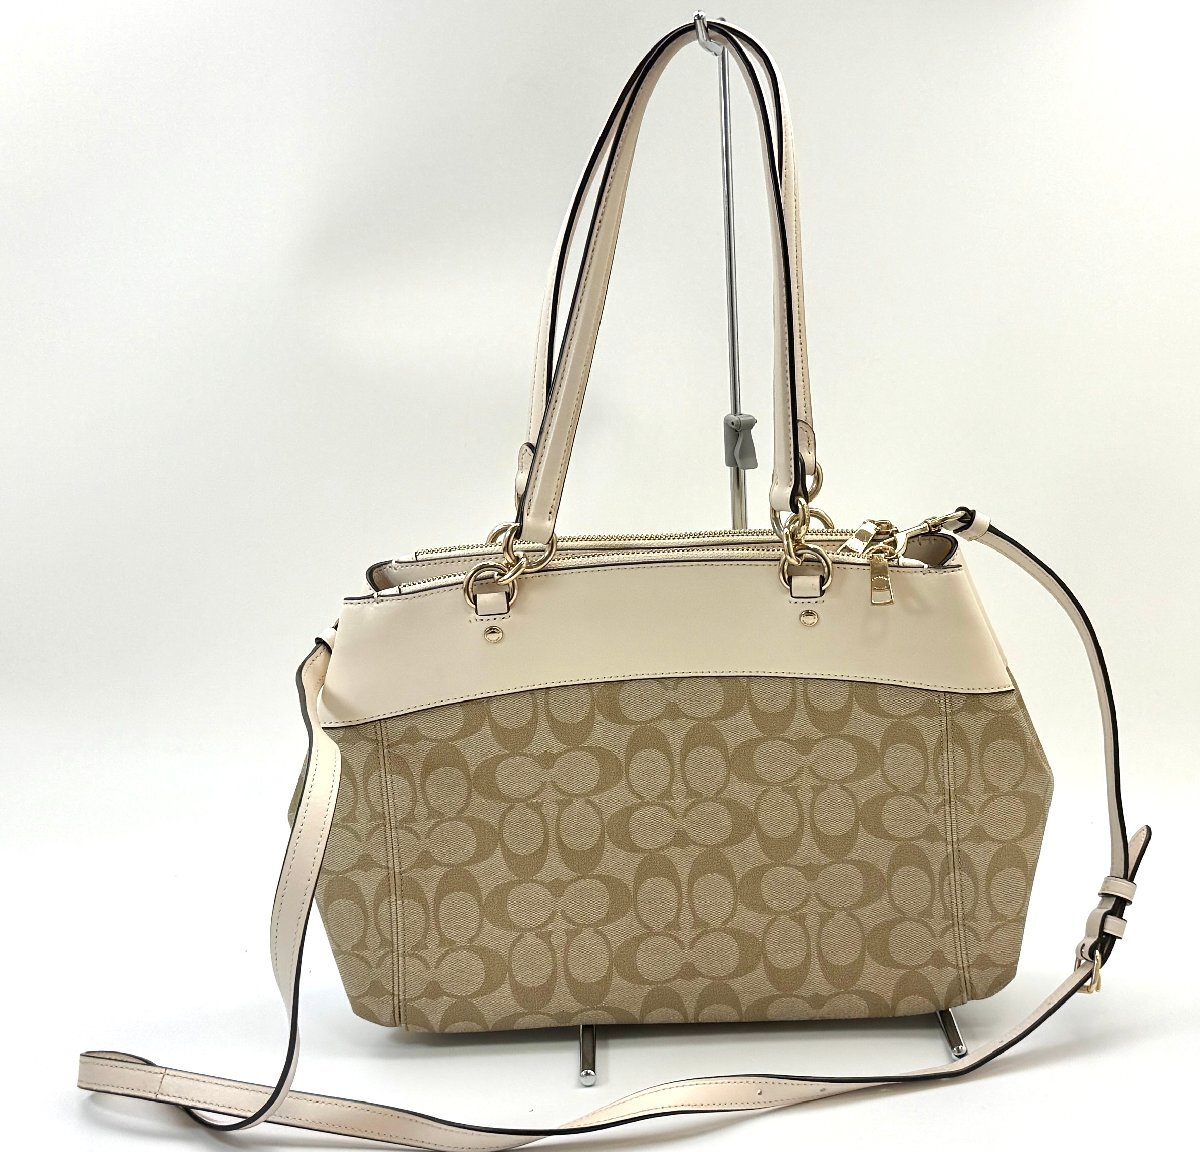 A) COACH Coach F25396 2WAY tote bag signature PVC× leather 2Way shoulder beige group used 